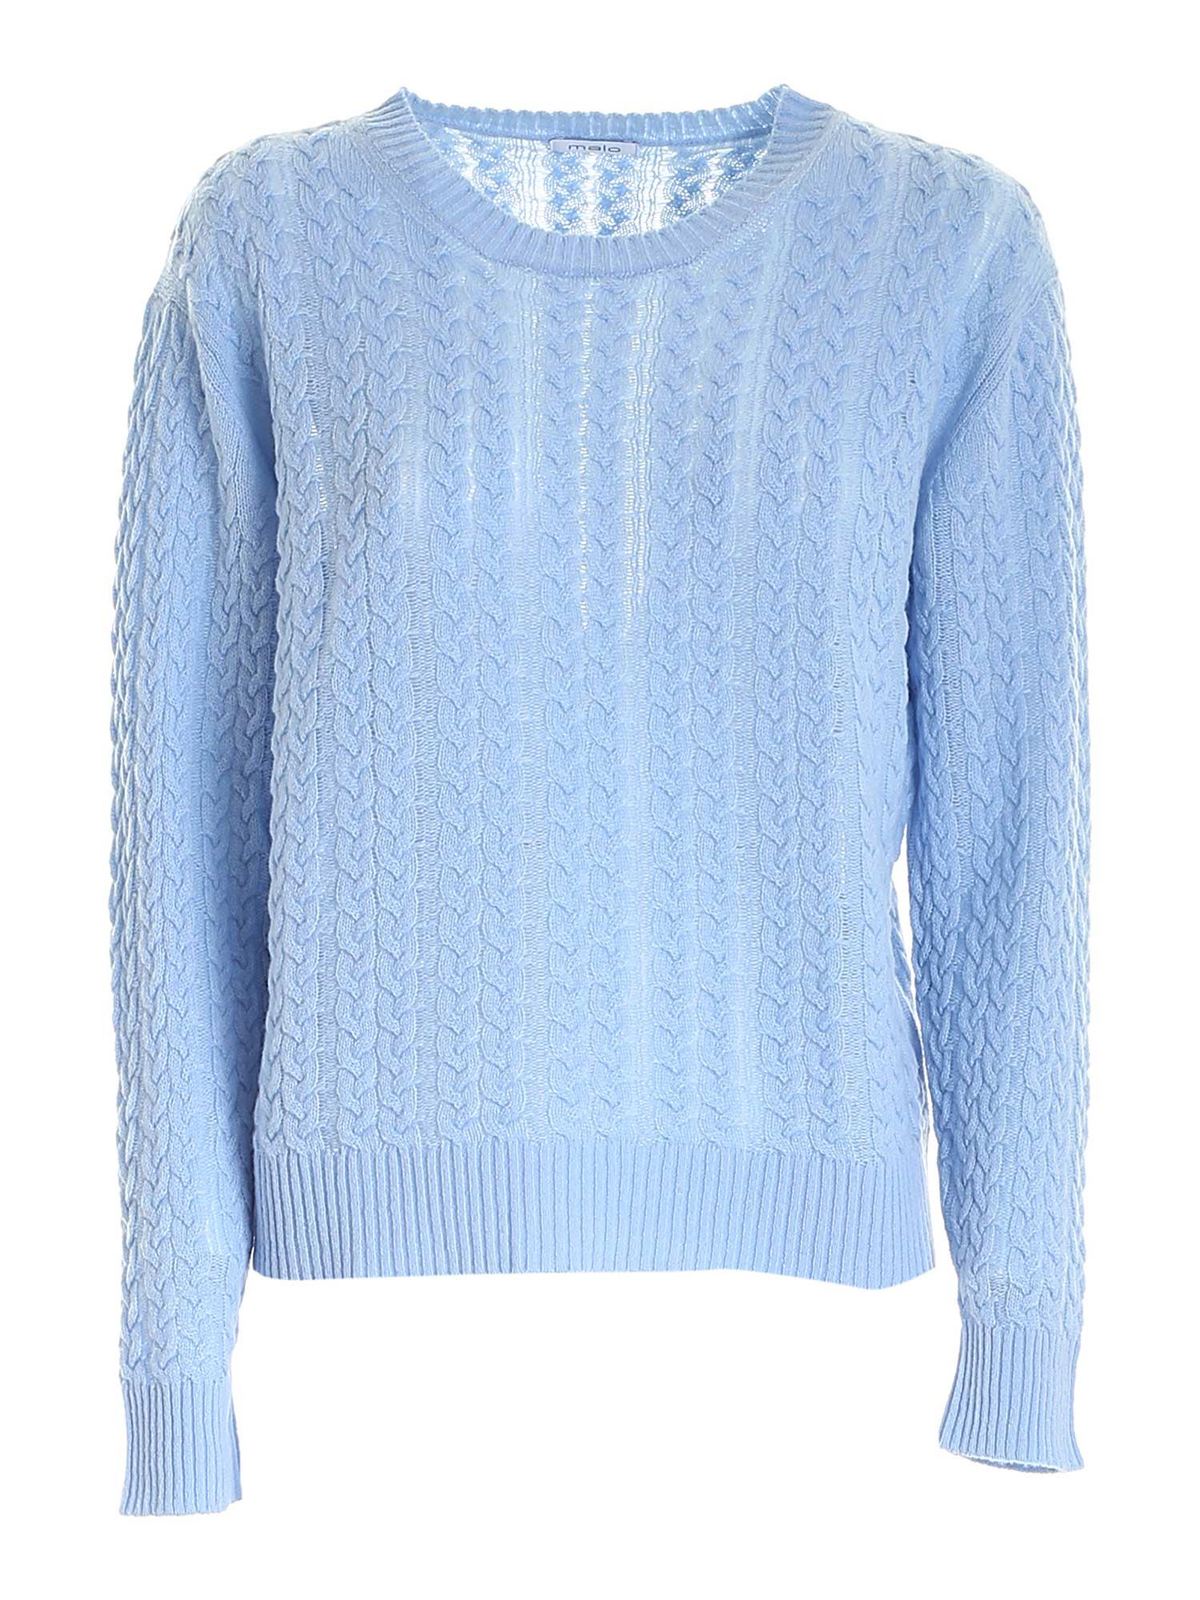 Malo Cashmeres CABLE KNIT CASHMERE SWEATER IN LIGHT BLUE